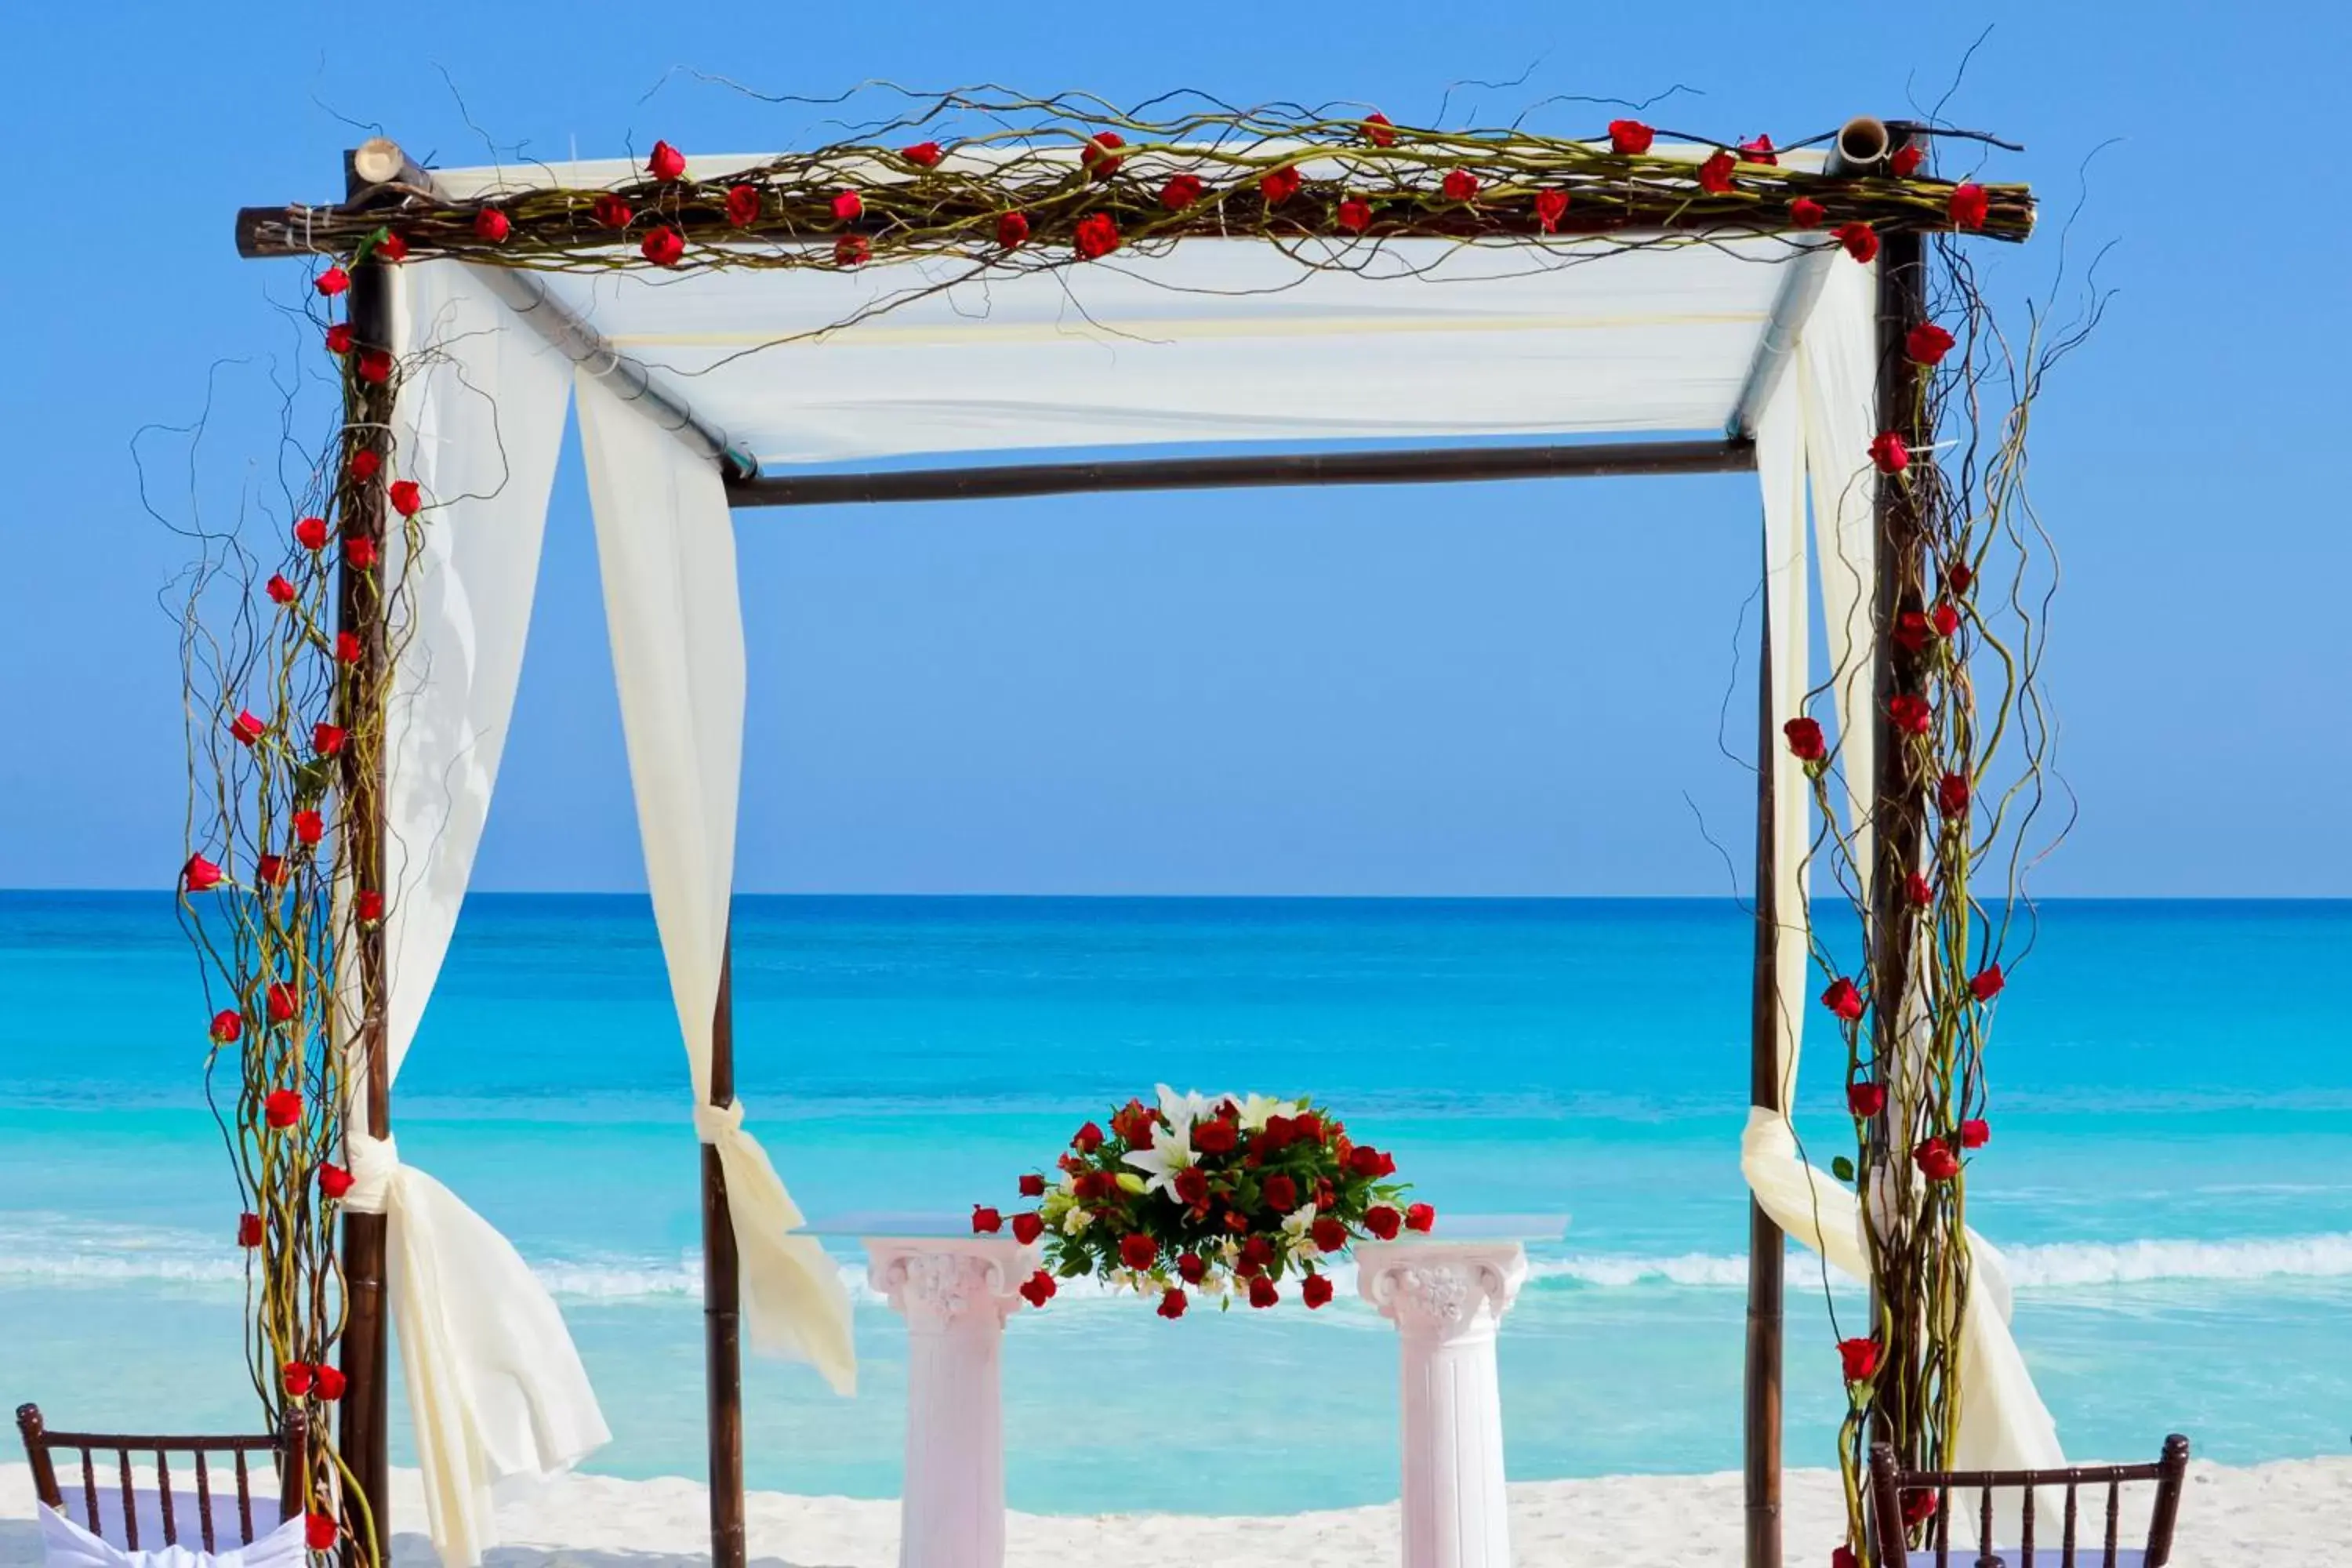 Banquet/Function facilities in Krystal Cancun